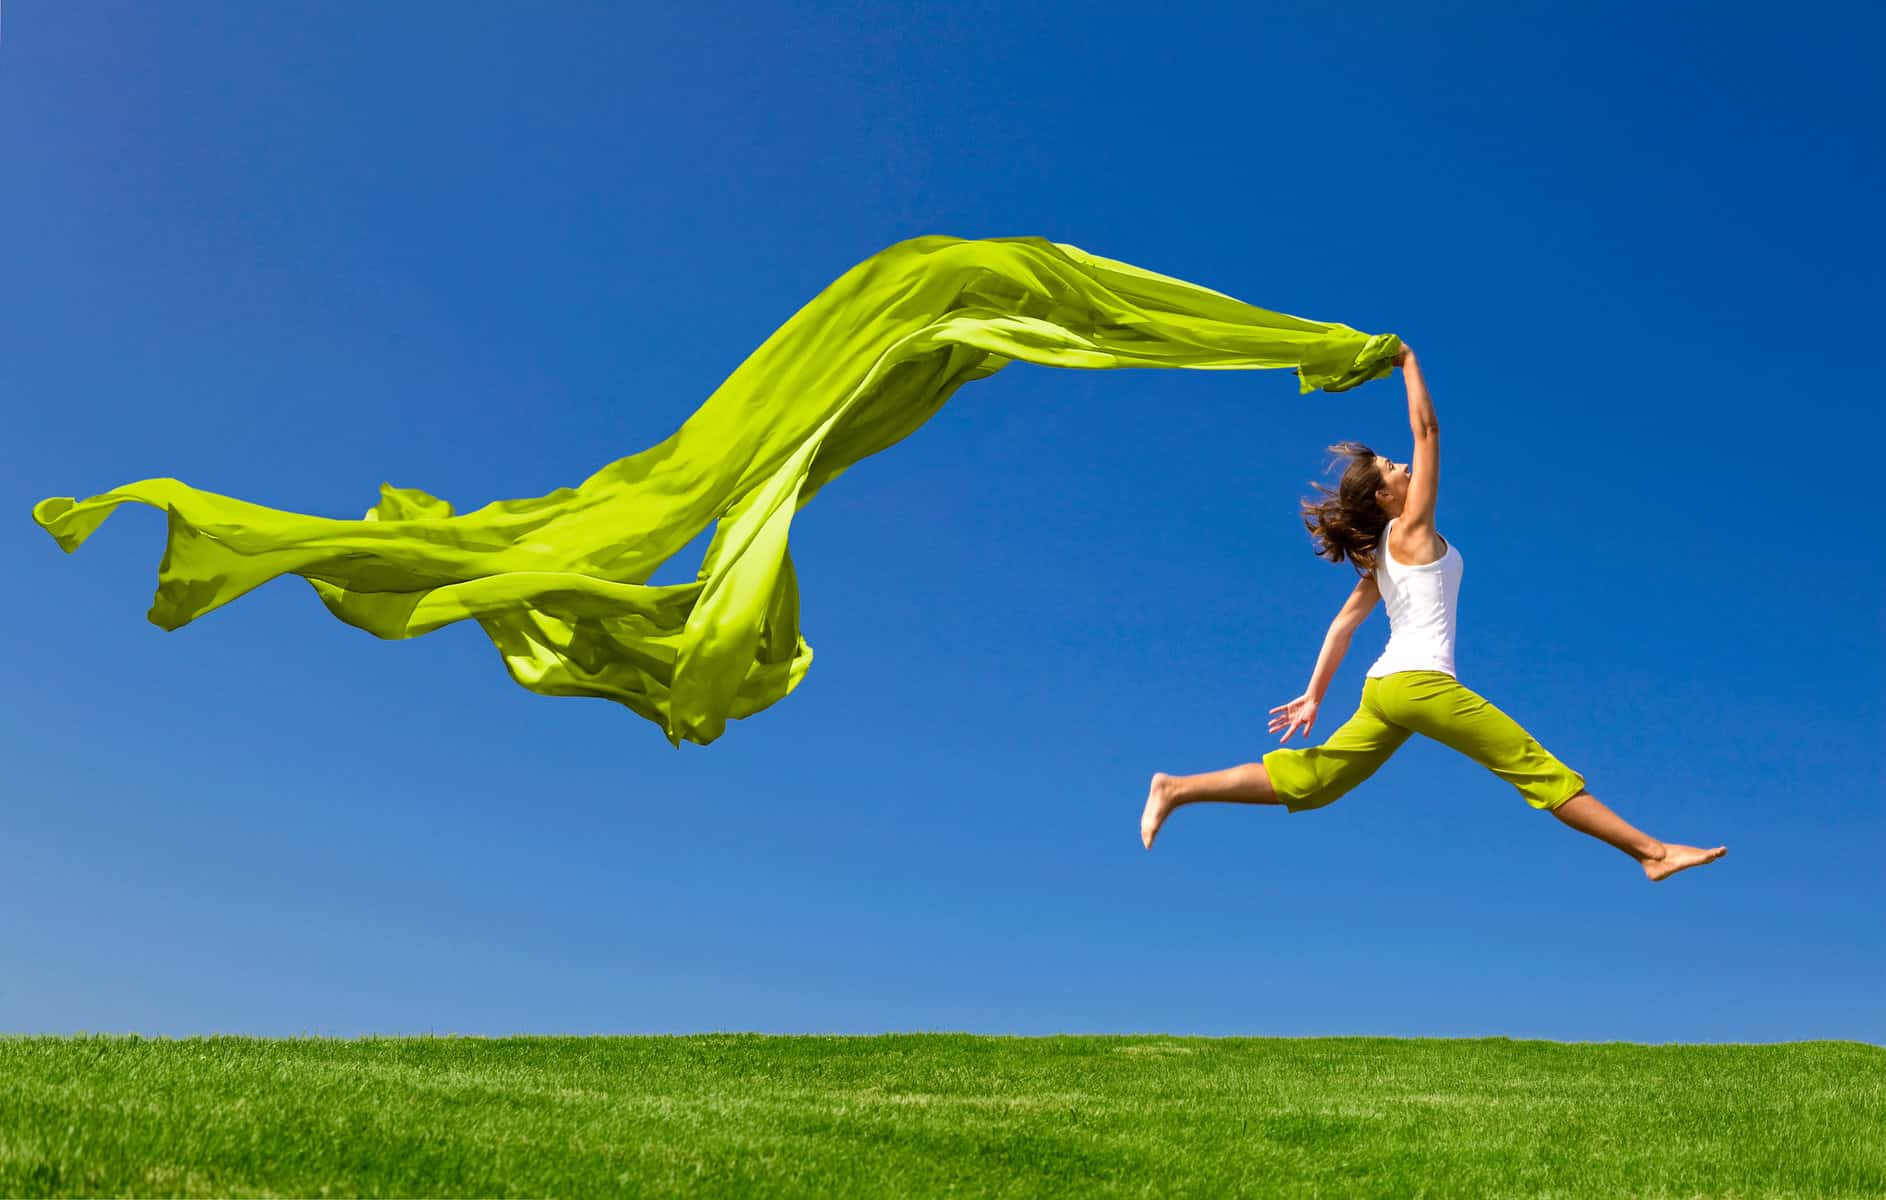 A woman jumping in a grass field holding a long bright green scarf